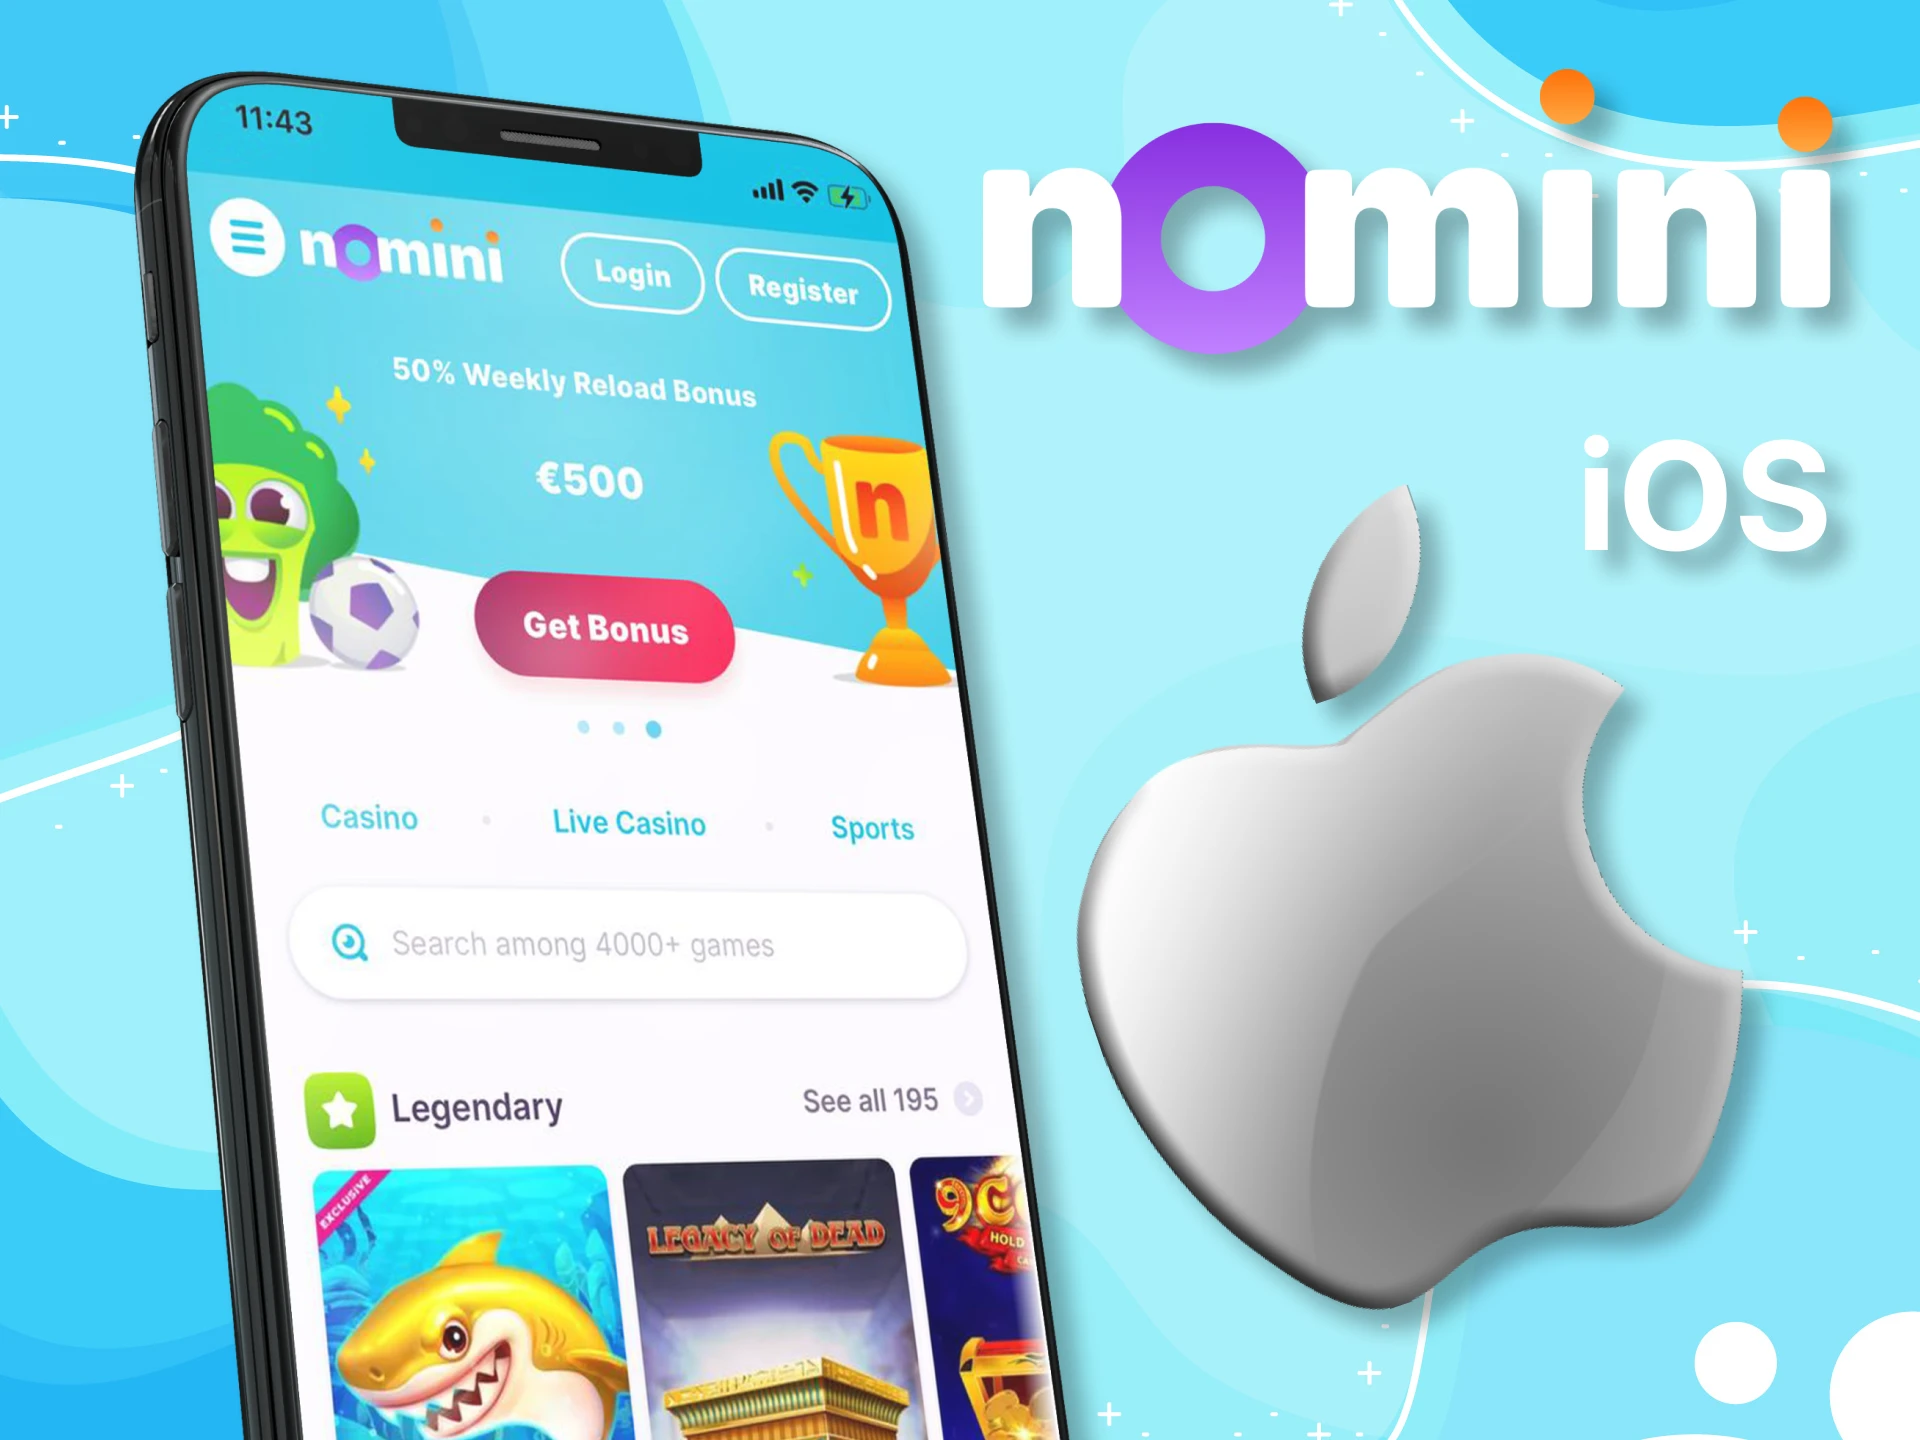 Nomini is supported on iOS devices.